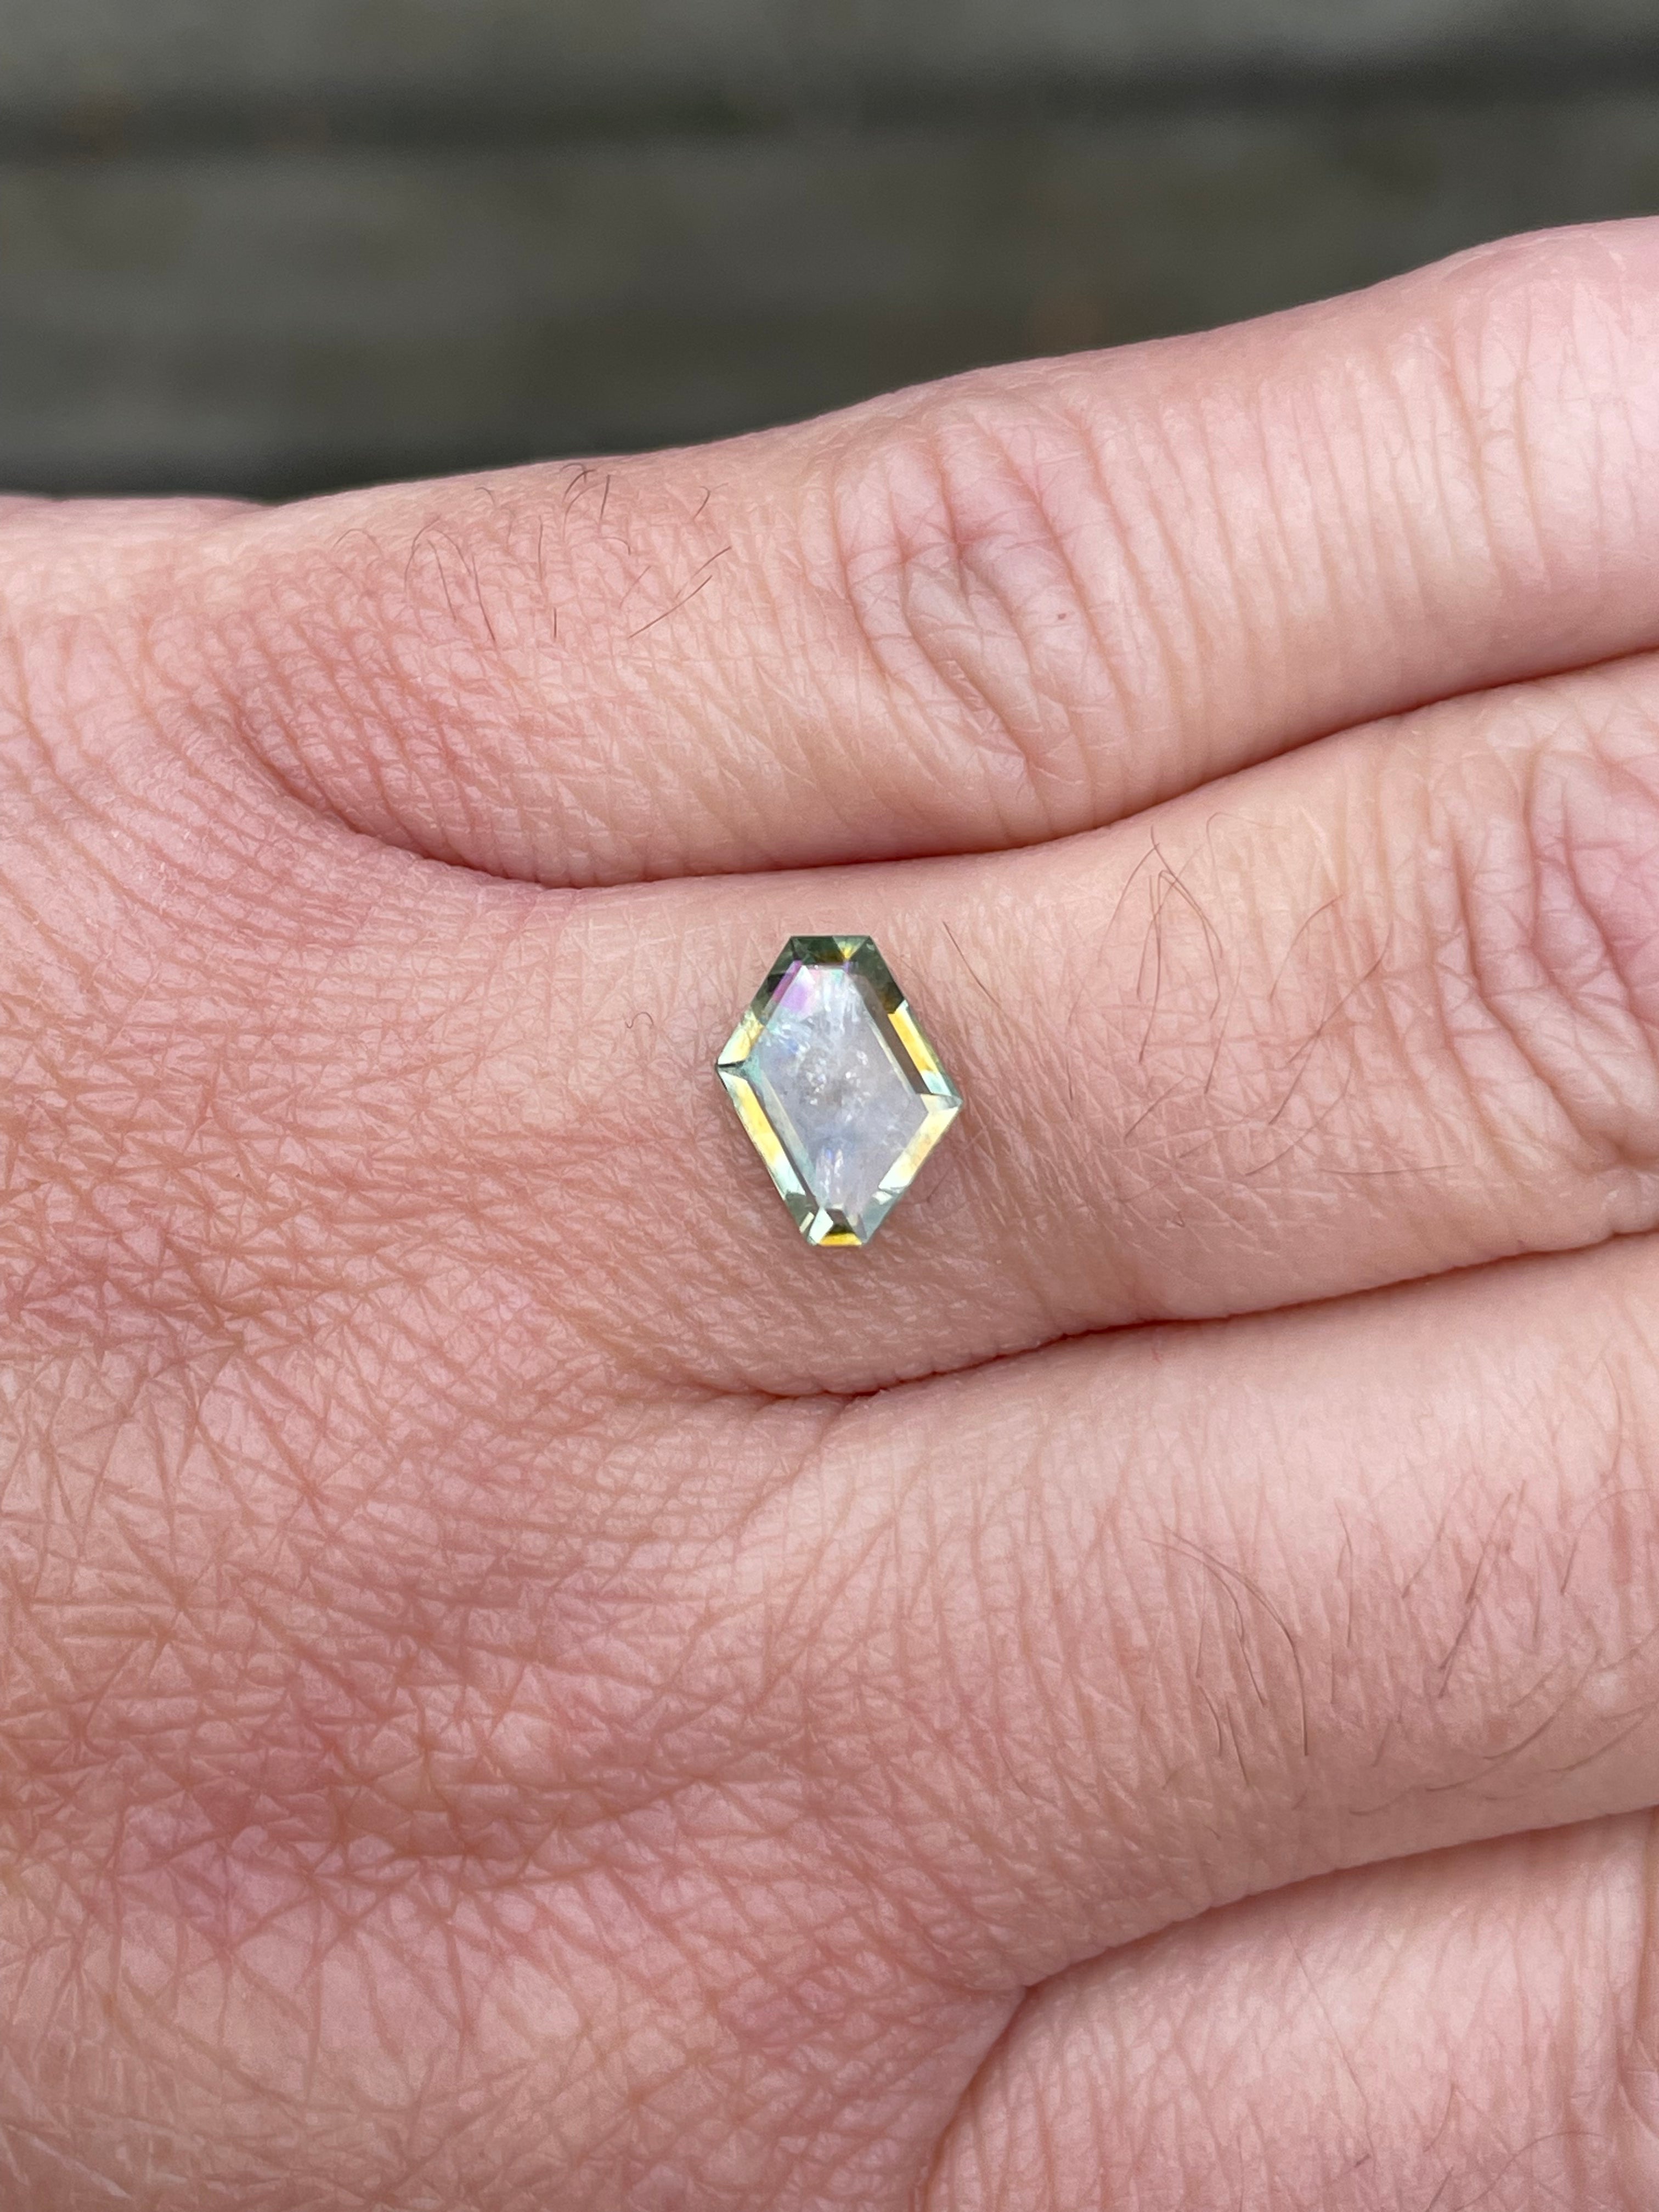 Montana Sapphire 1.59 CT Pale Blue, Silver, Green, with Gold Heart Portrait Cut